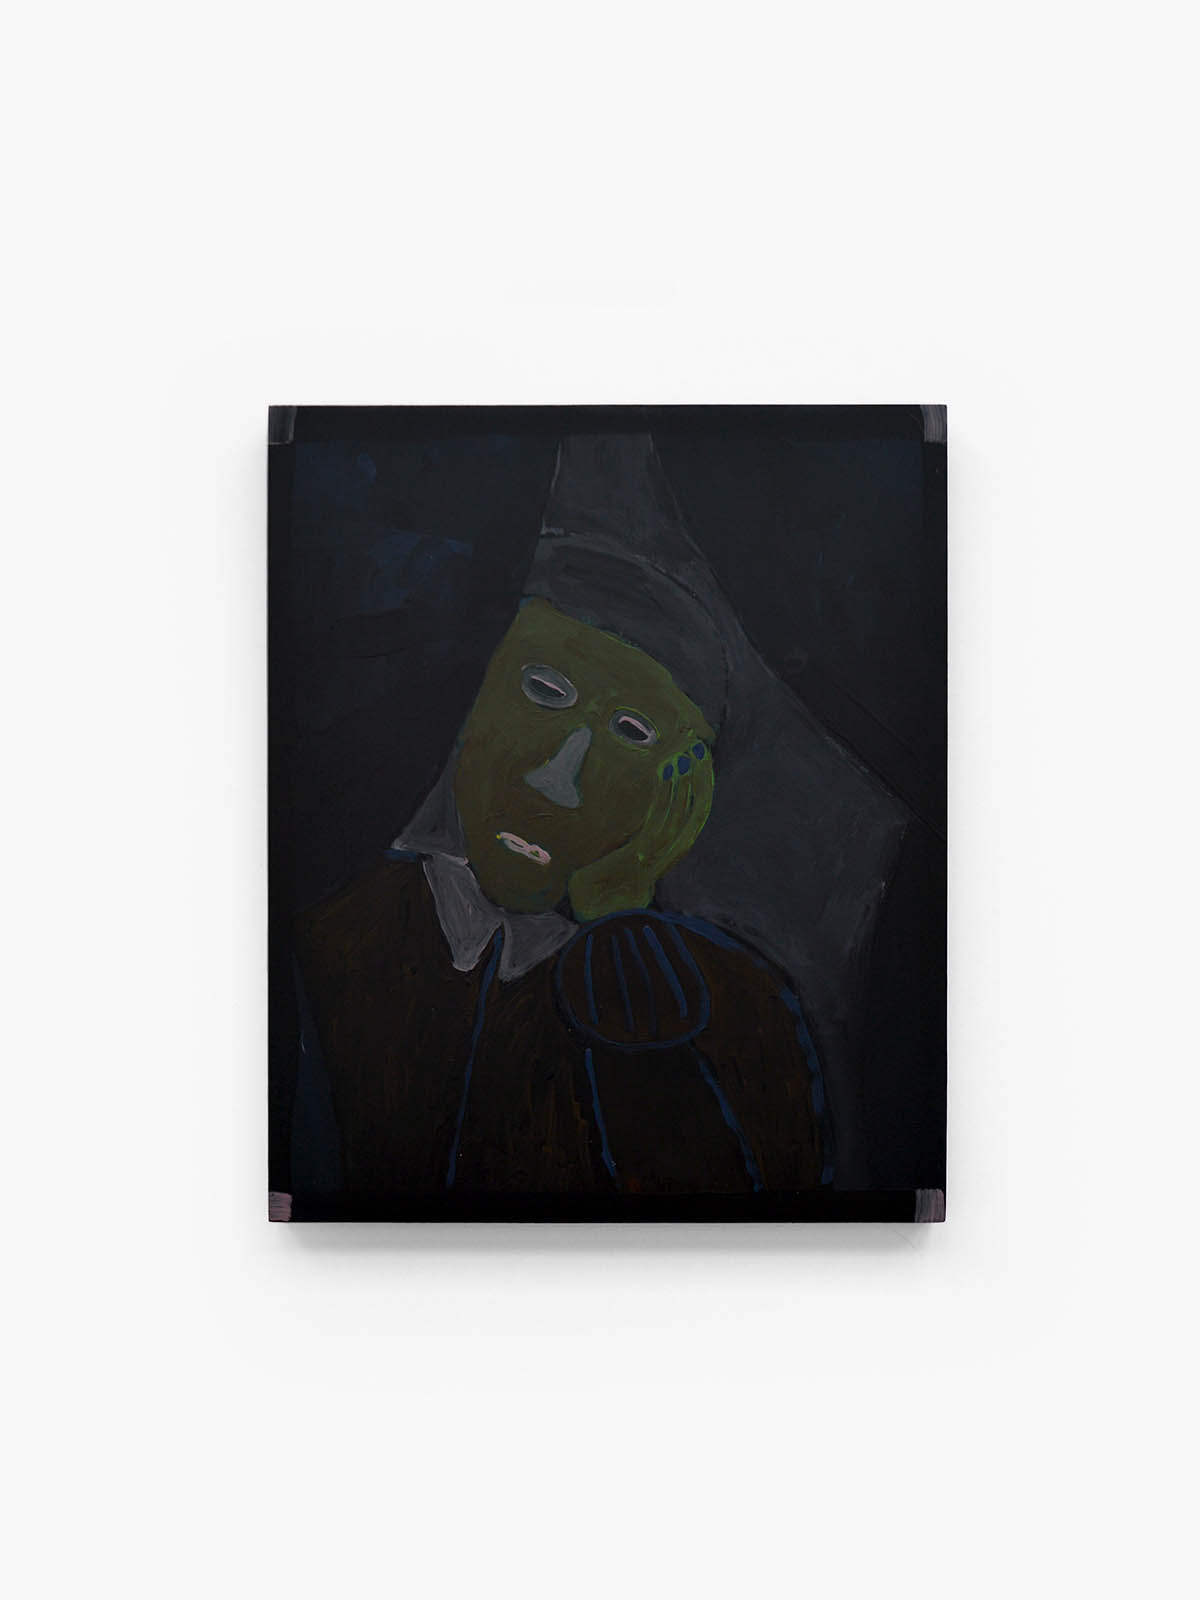 Dave Swensen, Broken Hearted Man, 2021, Painting, Paint on MDF, 36 (h) x 26 (w) x 2 (d) cm;